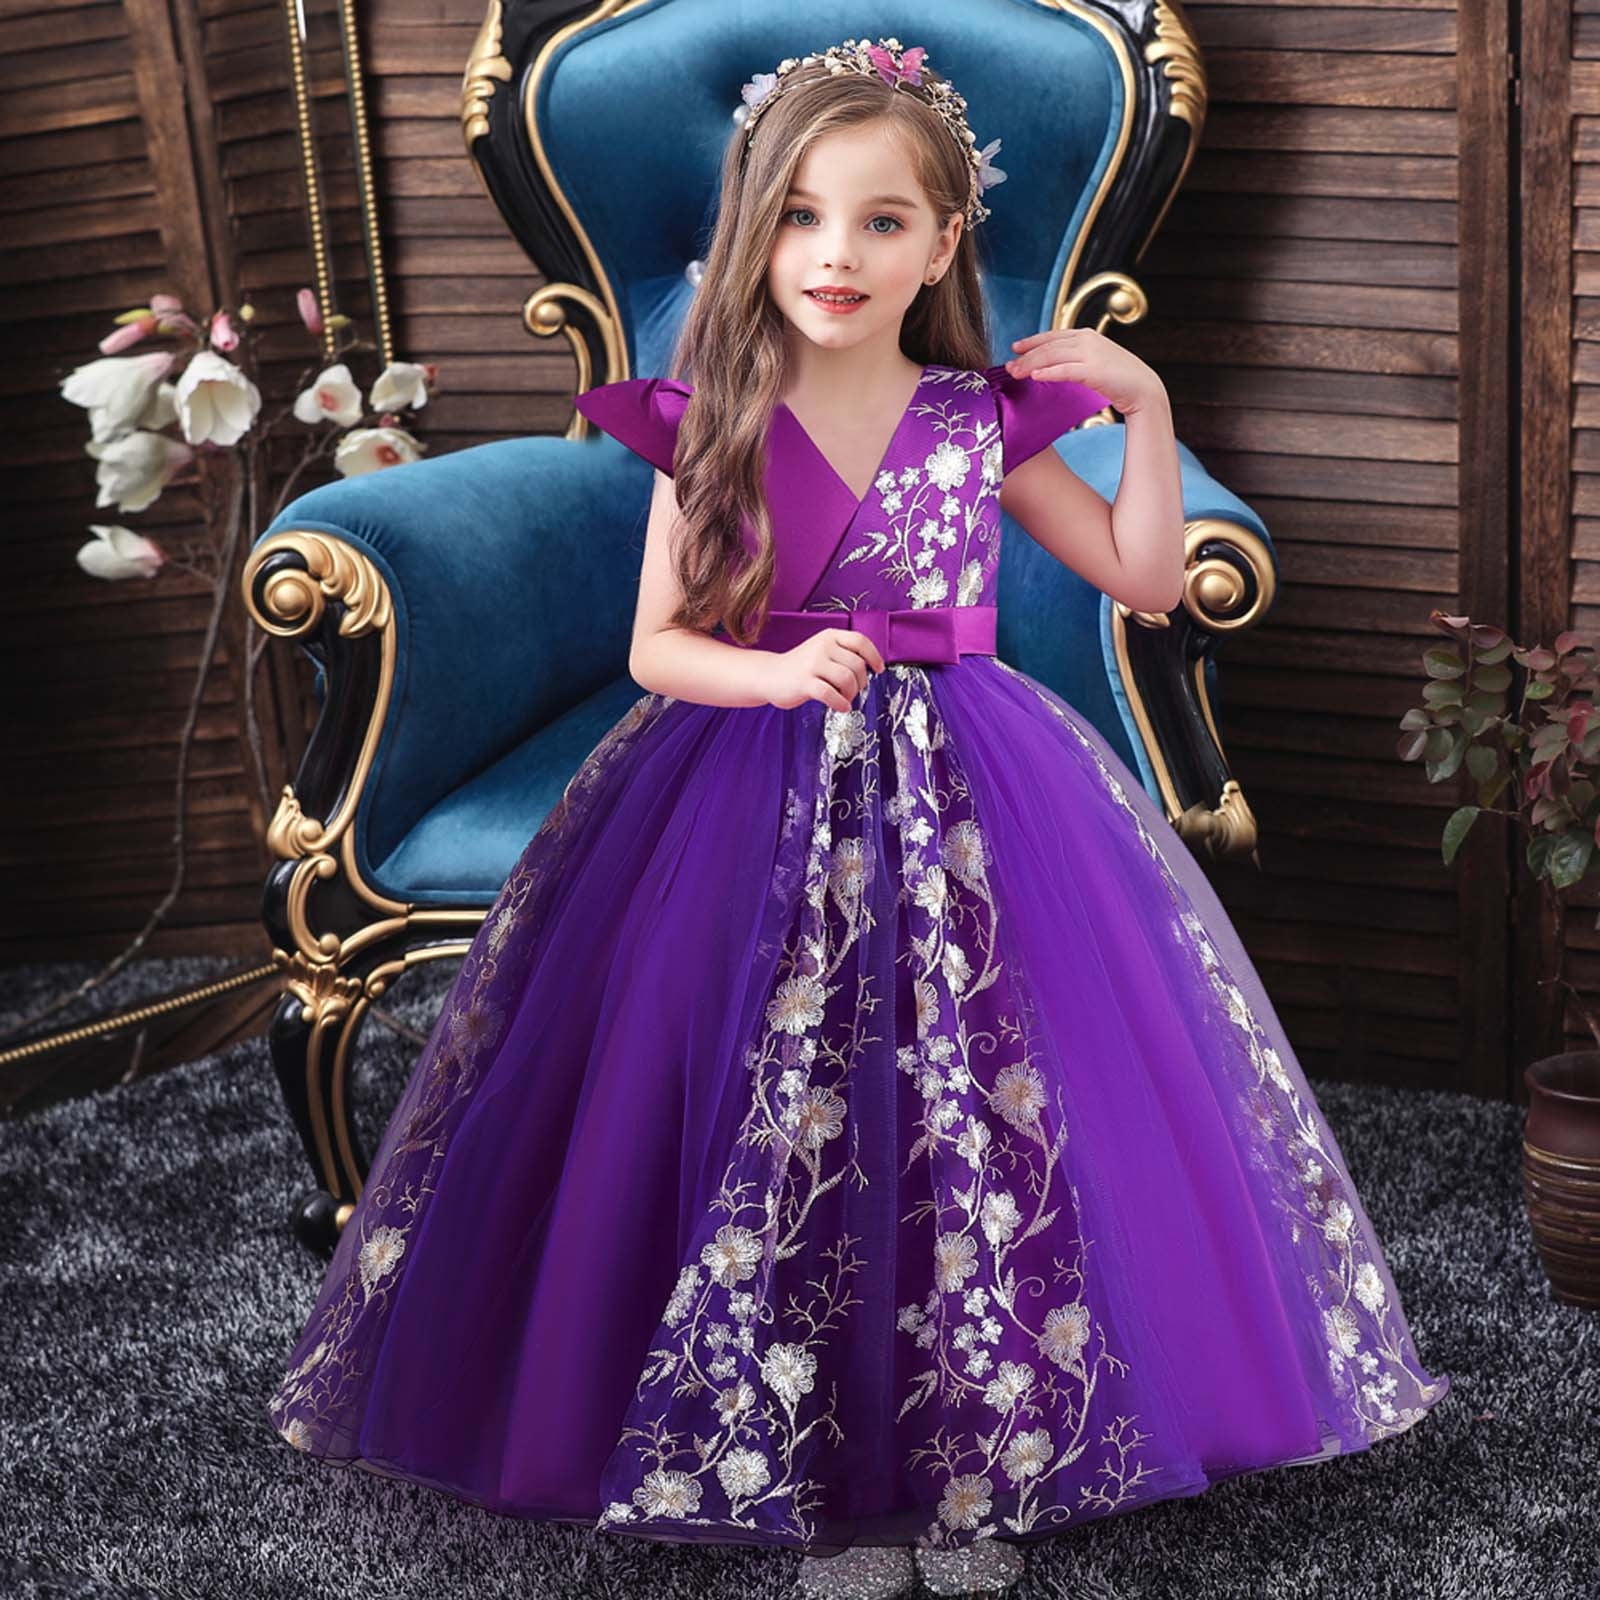 10-12 Year Girls Party Dresses: Buy Party Wear Dresses for 10-12 Year Girls  Online in India - FirstCry.com